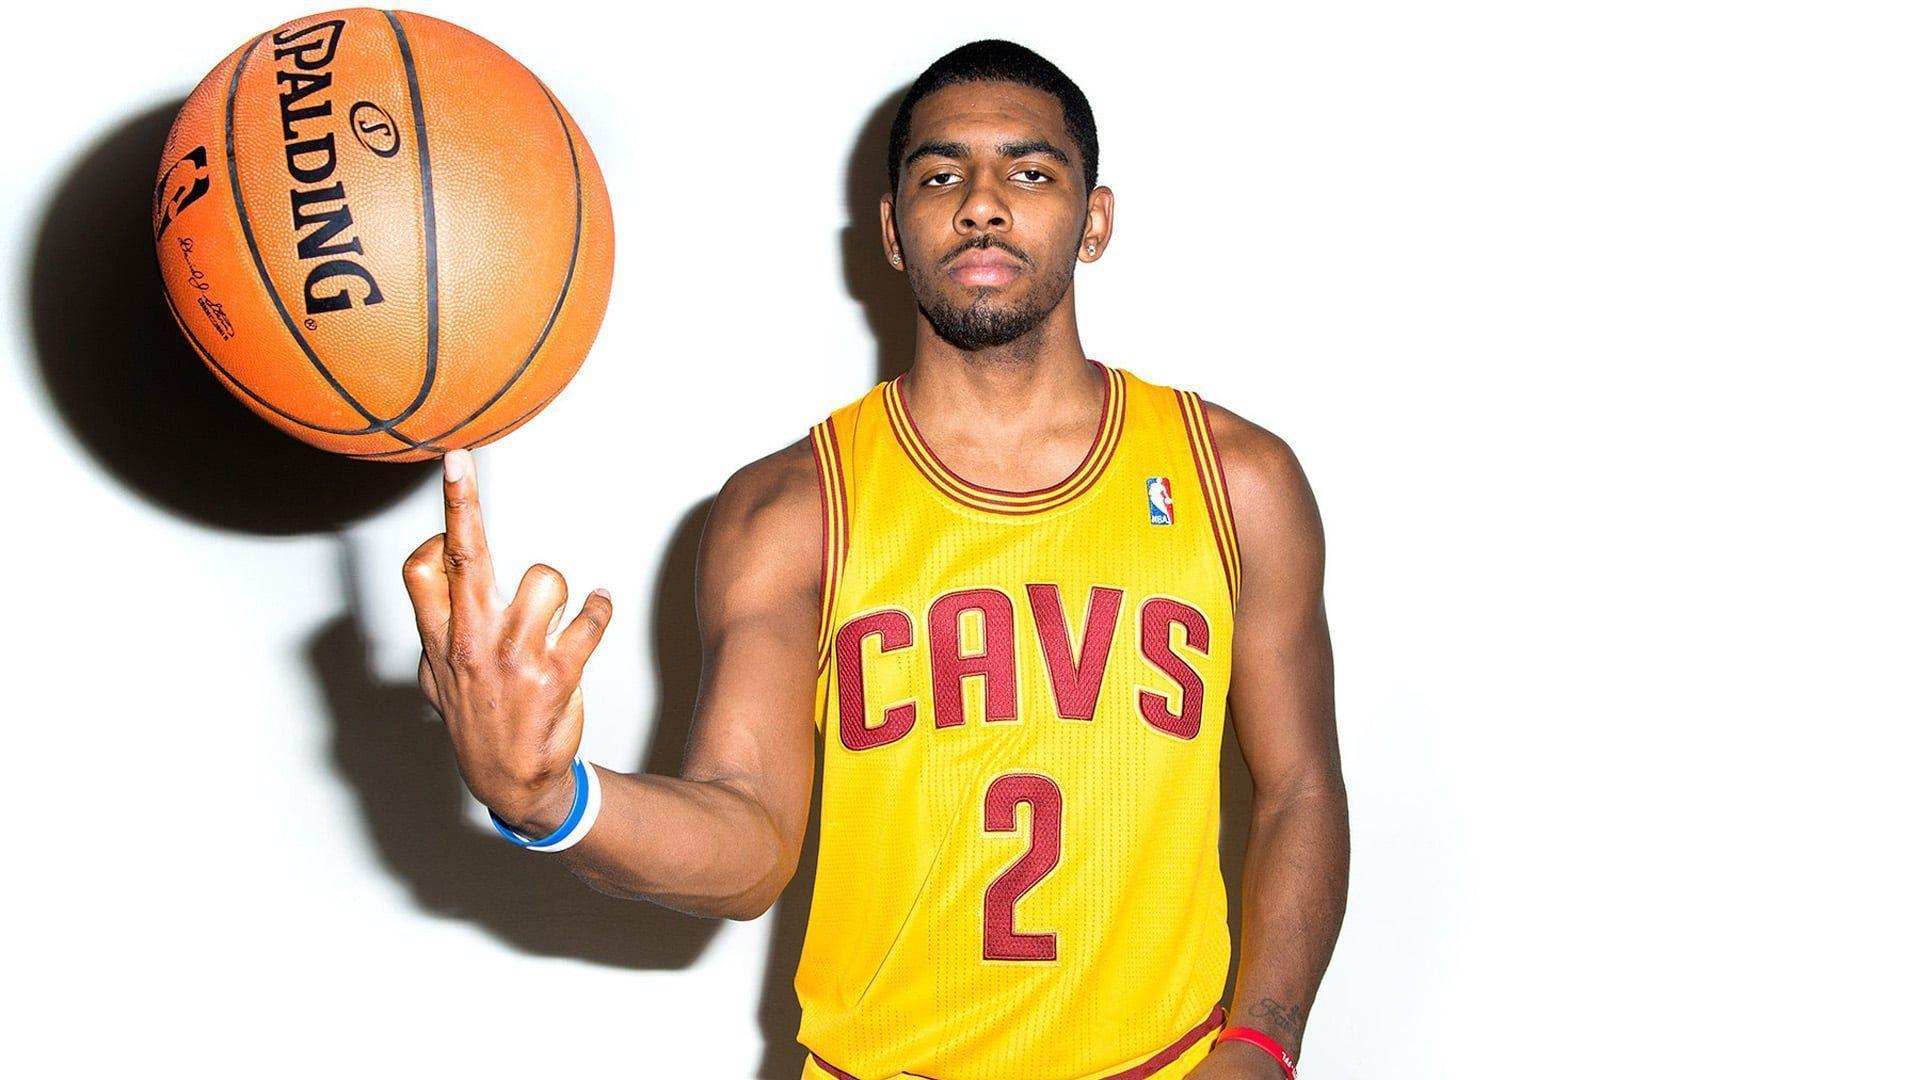 17+ Kyrie Irving wallpapers HD Logo, Cleveland, Cavs, basketball